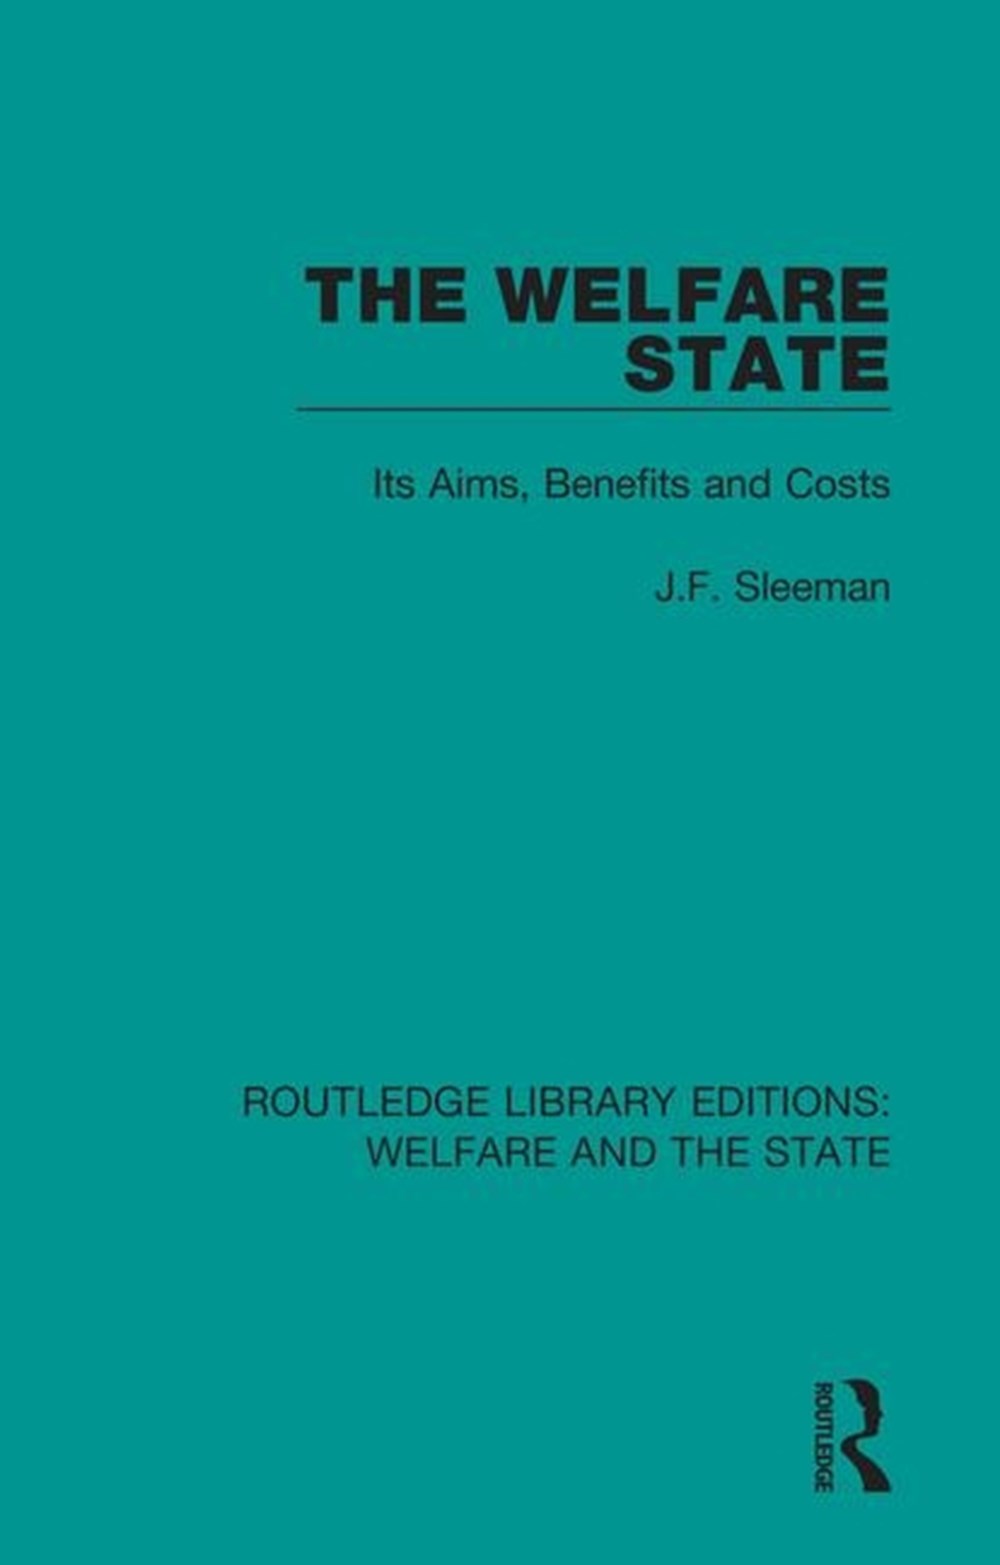 Welfare State: Its Aims, Benefits and Costs